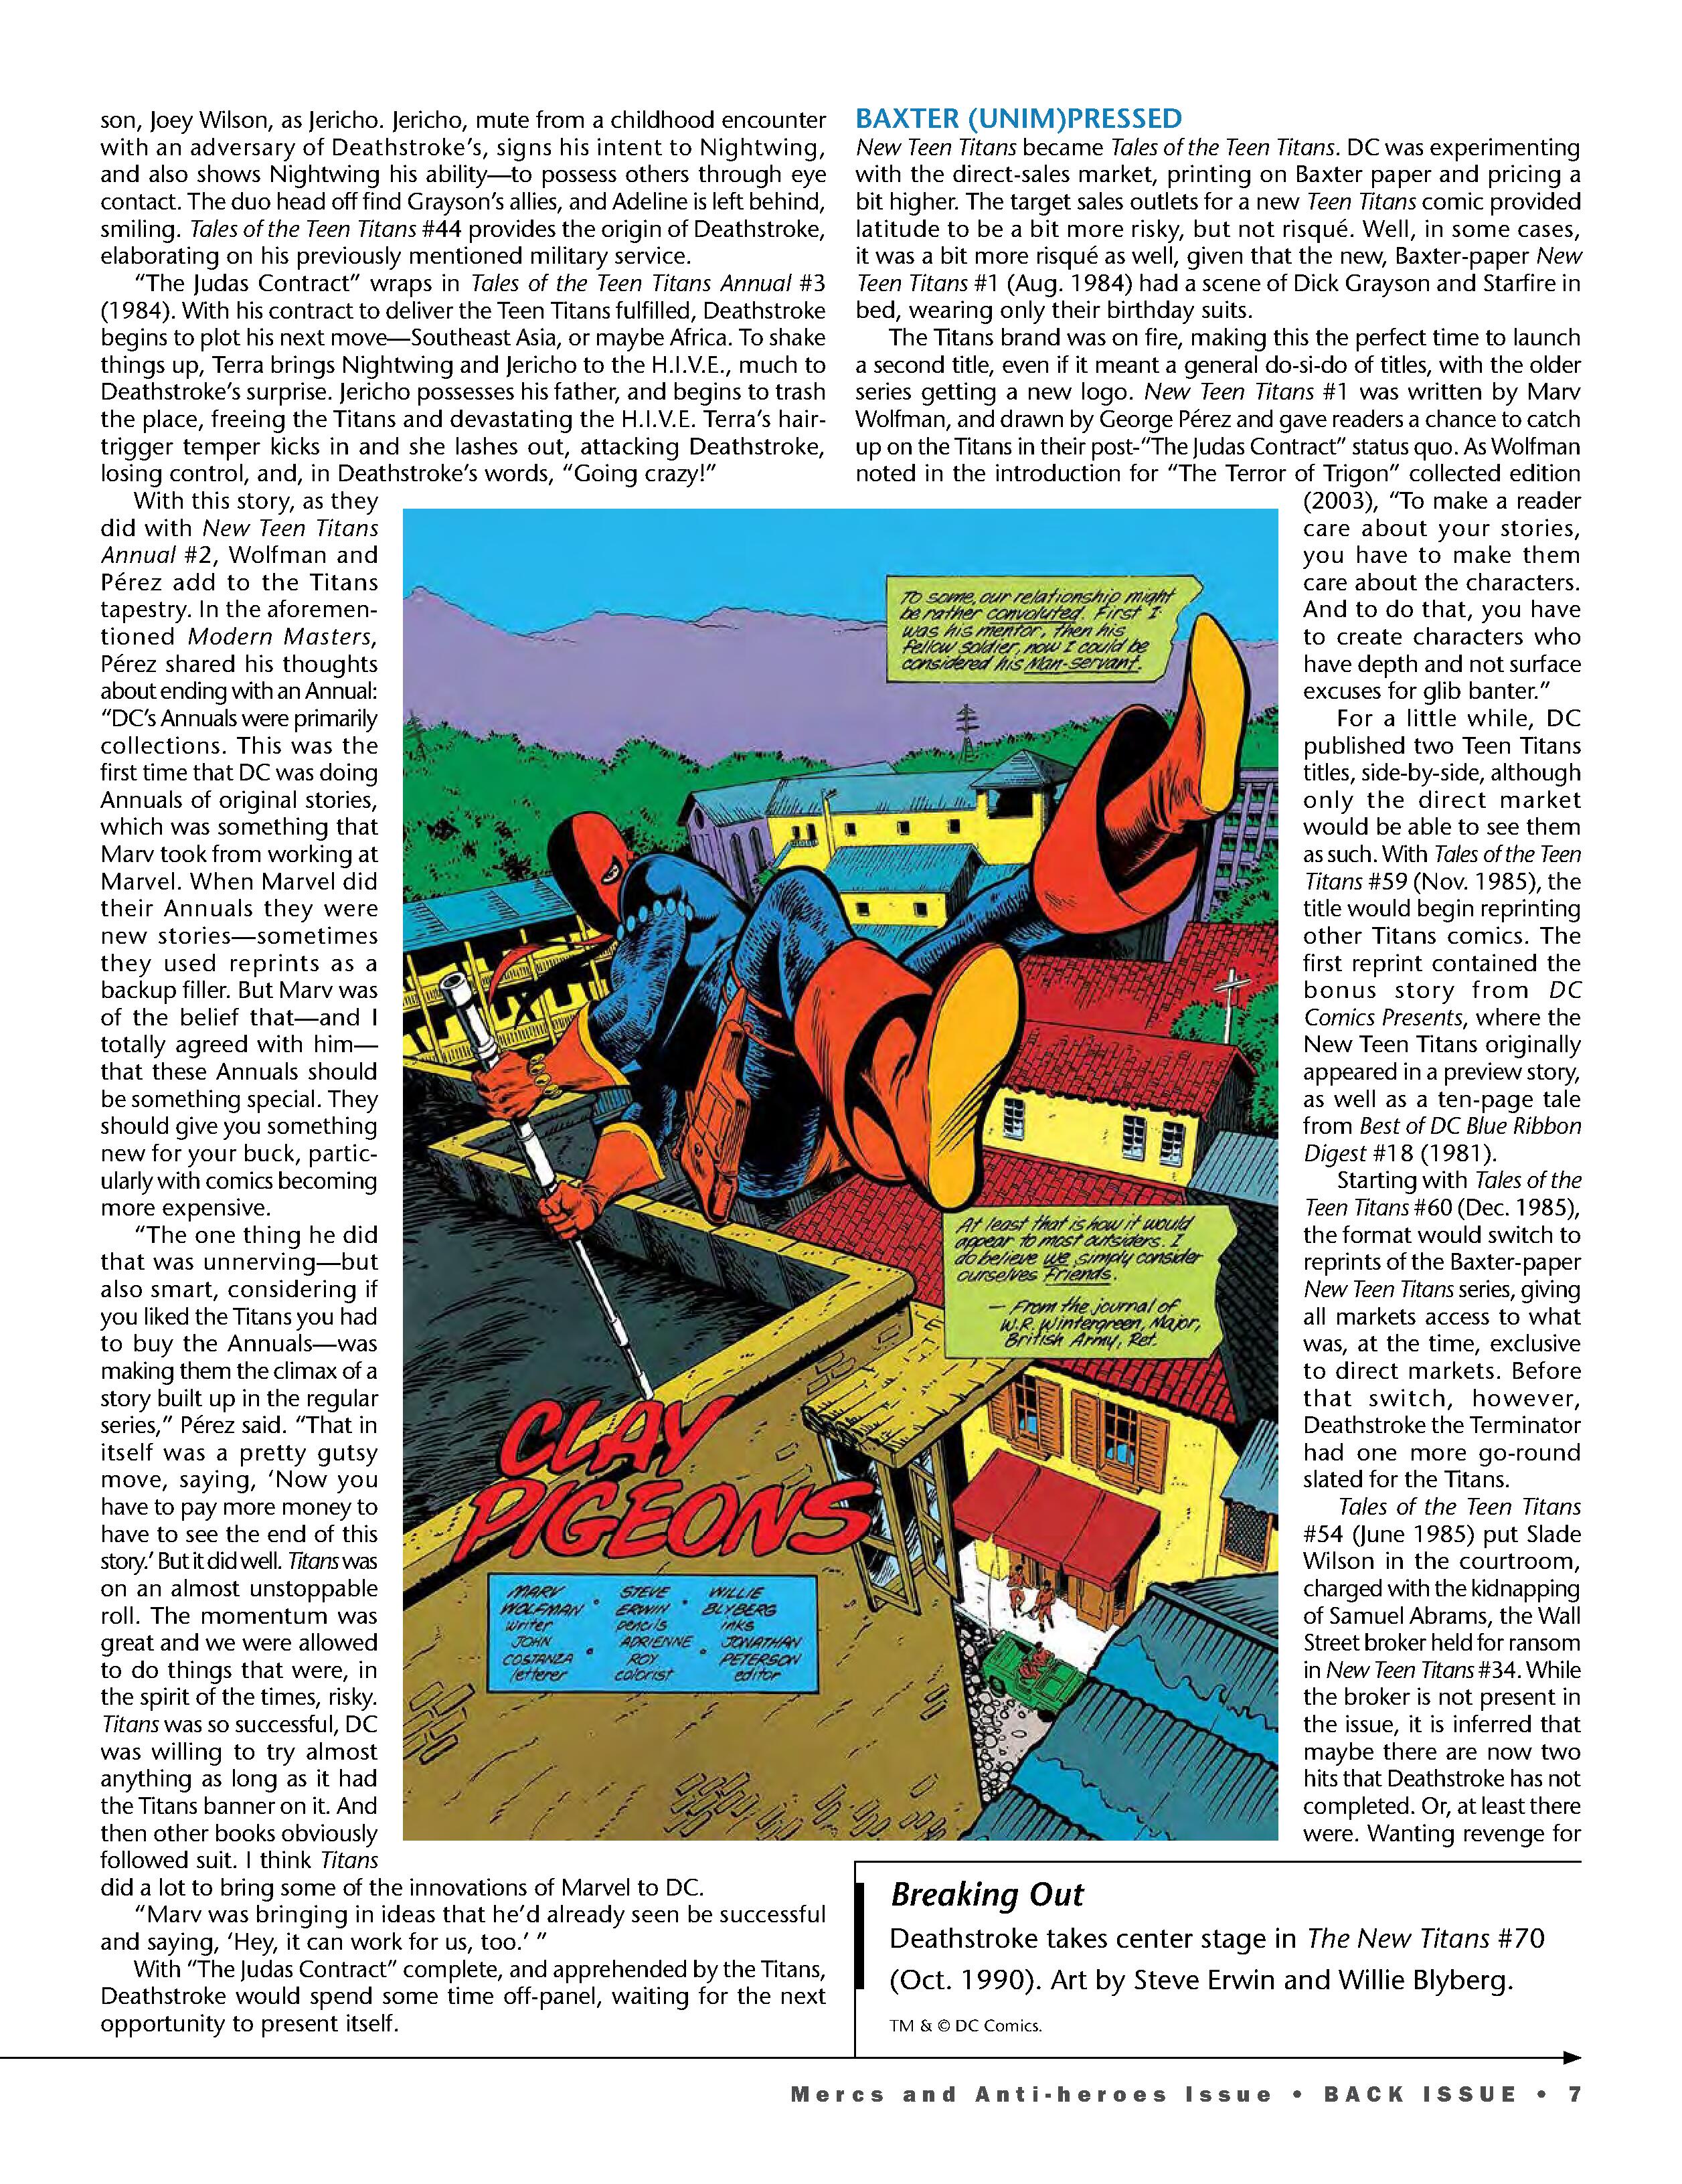 Read online Back Issue comic -  Issue #102 - 9